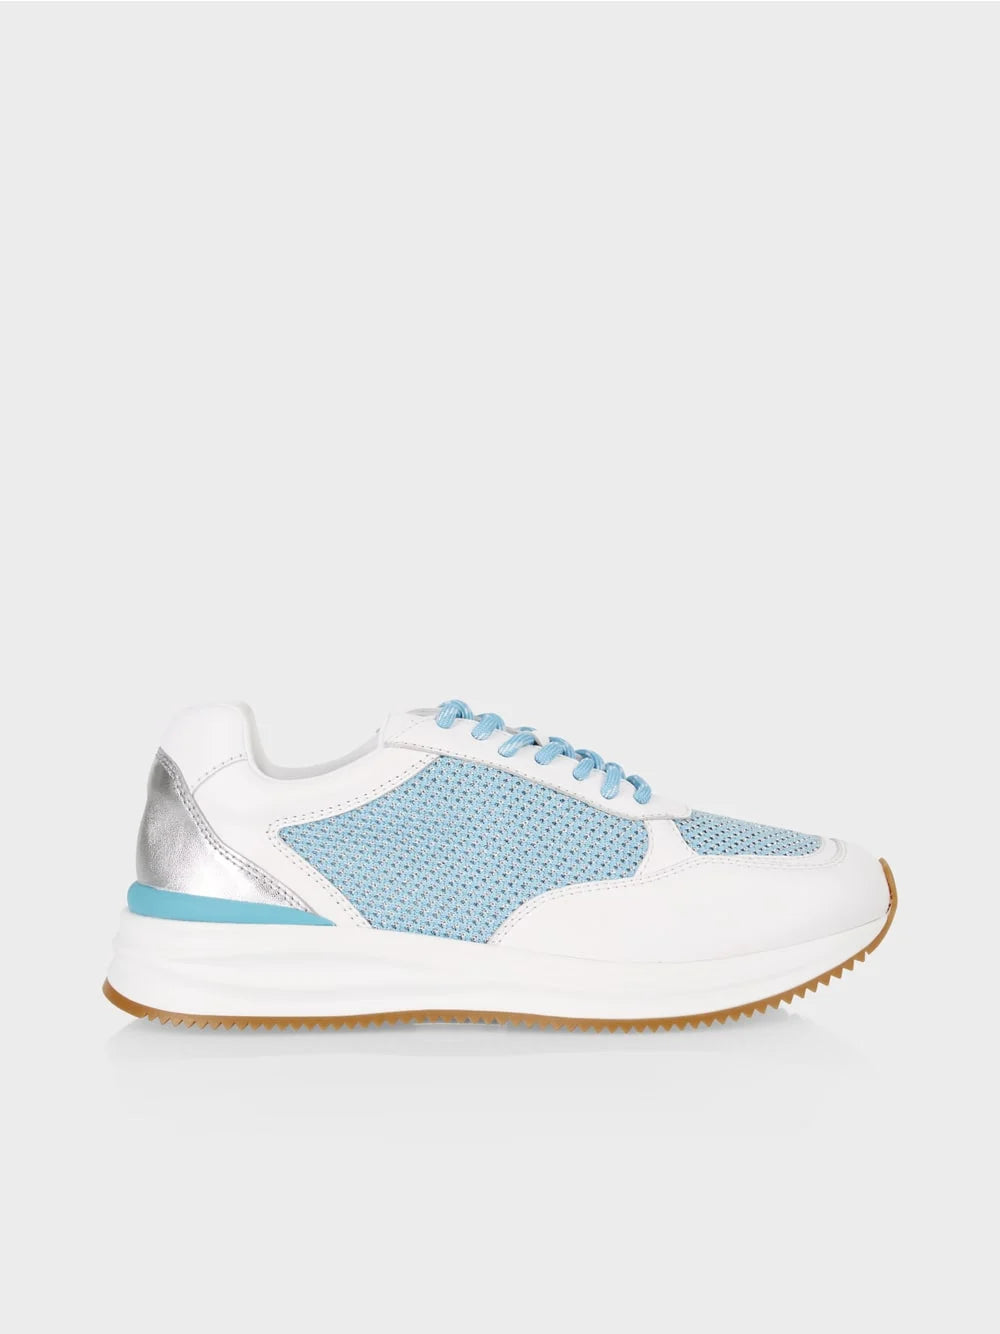 Marc Cain Blue Trainers Sneakers with Lurex